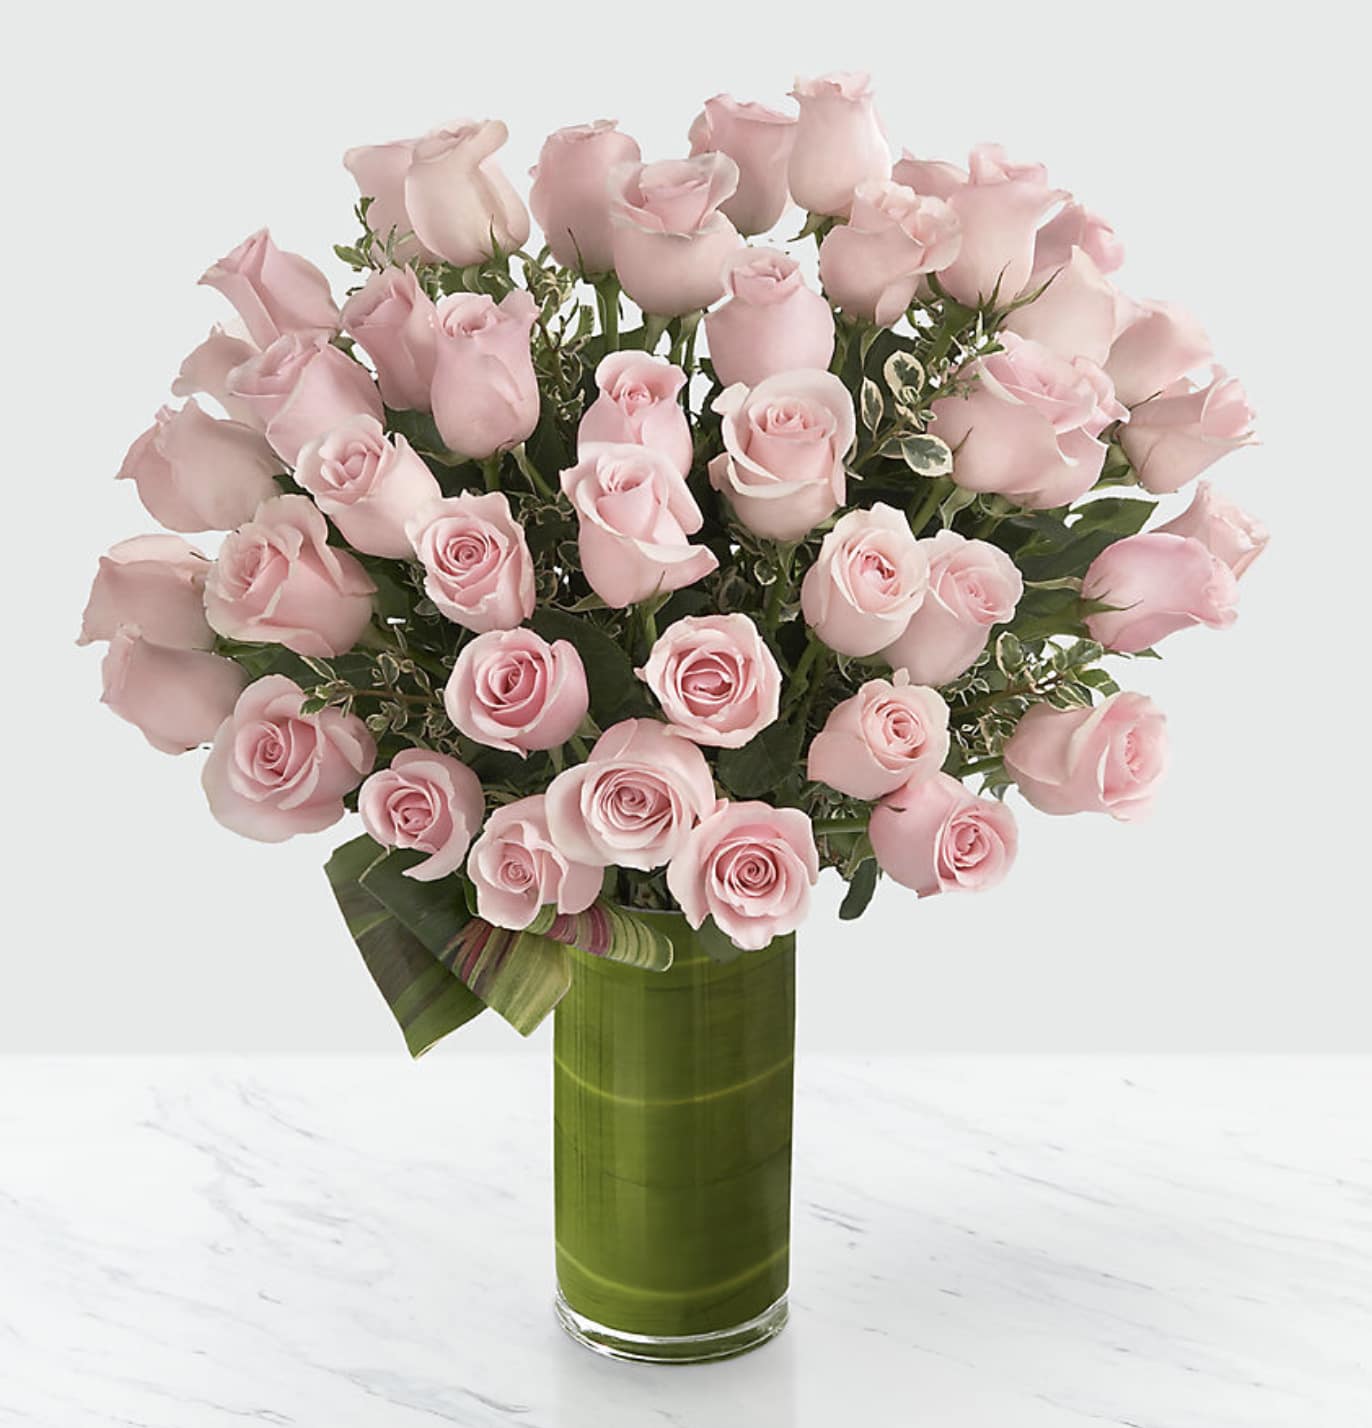 Delighted Luxury Rose Bouquet - 48 Premium Long-Stemmed Roses - They've guided you through every pivotal moment in your life. Your only wish is to create as much pleasure as they have continually done throughout the years. Offer them our pale pink 48 premium long-stemmed rose bouquet situated in a superior clear glass cylindrical vase to create a moment of delight and blushing radiance they will never forget. Includes: 48 stems of pink  premium long-stemmed roses, exotic foliage 